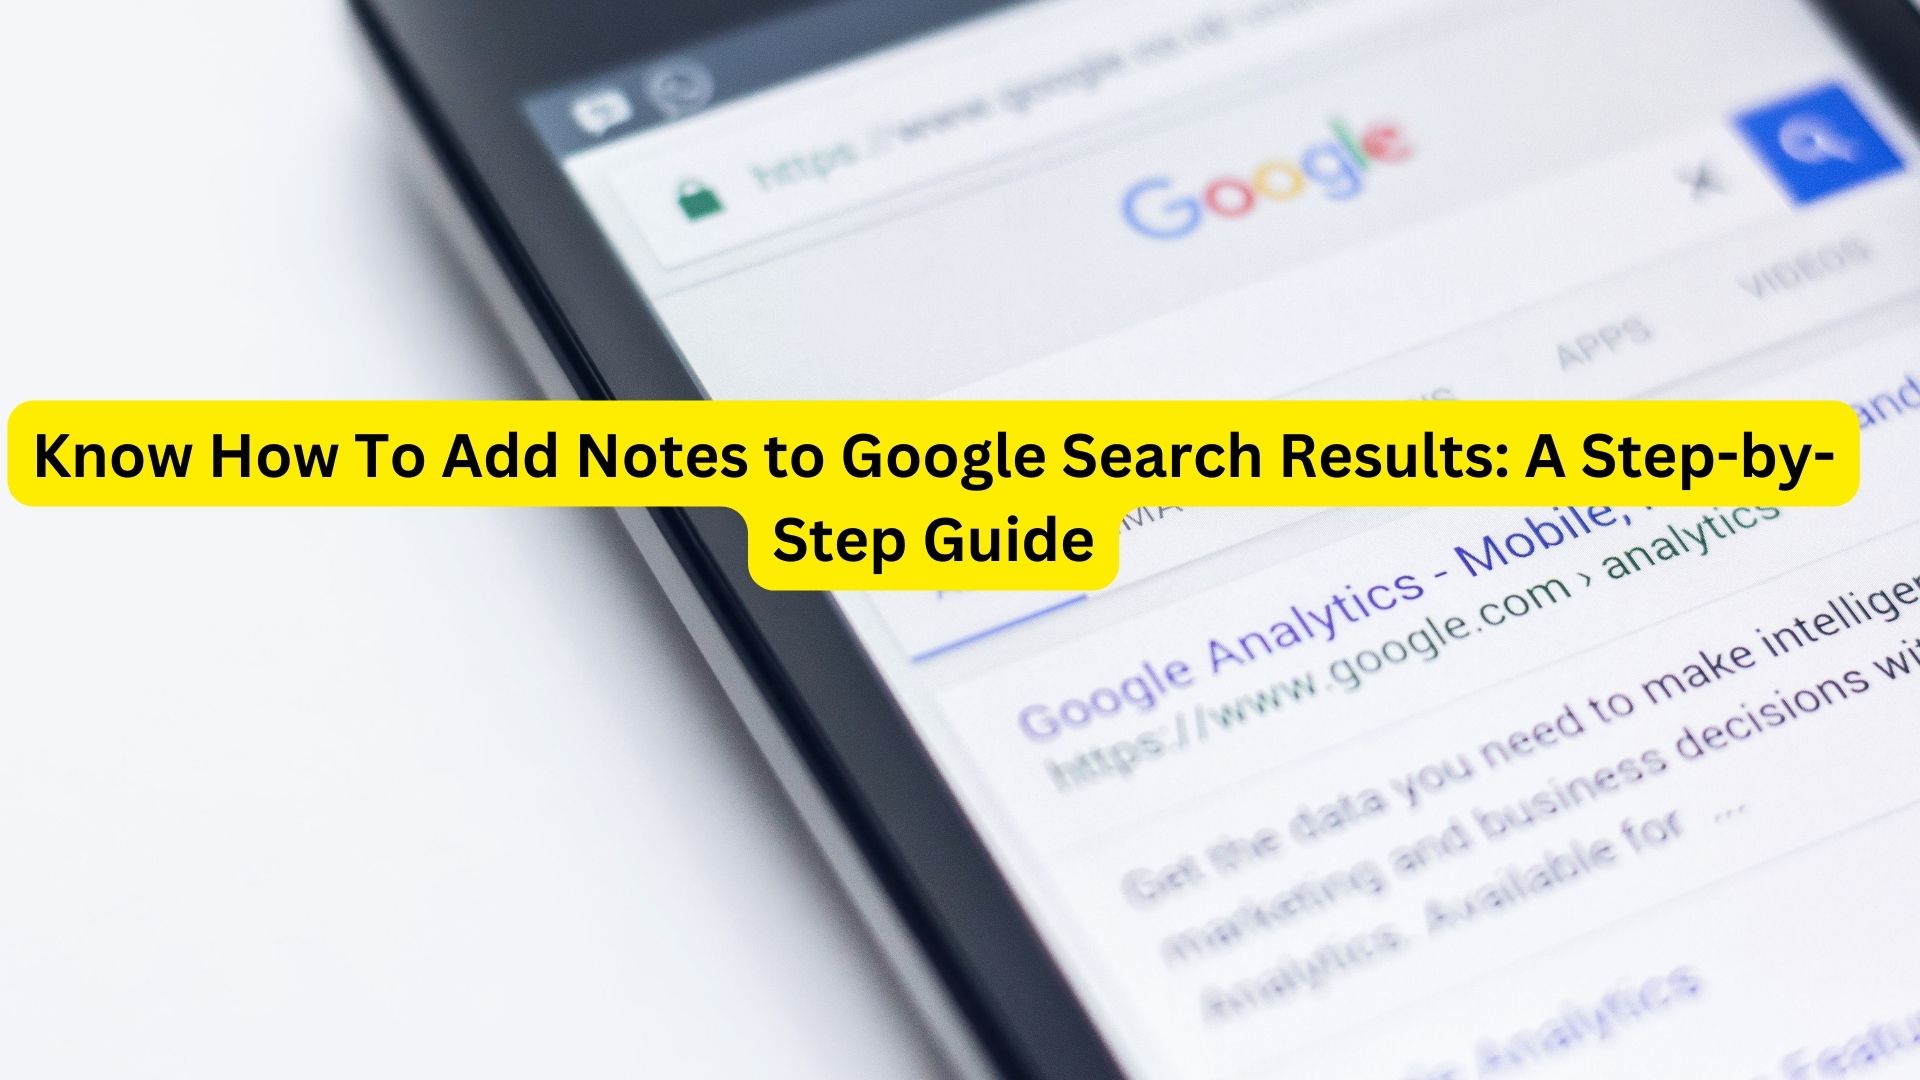 Know How To Add Notes to Google Search Results: A Step-by-Step Guide